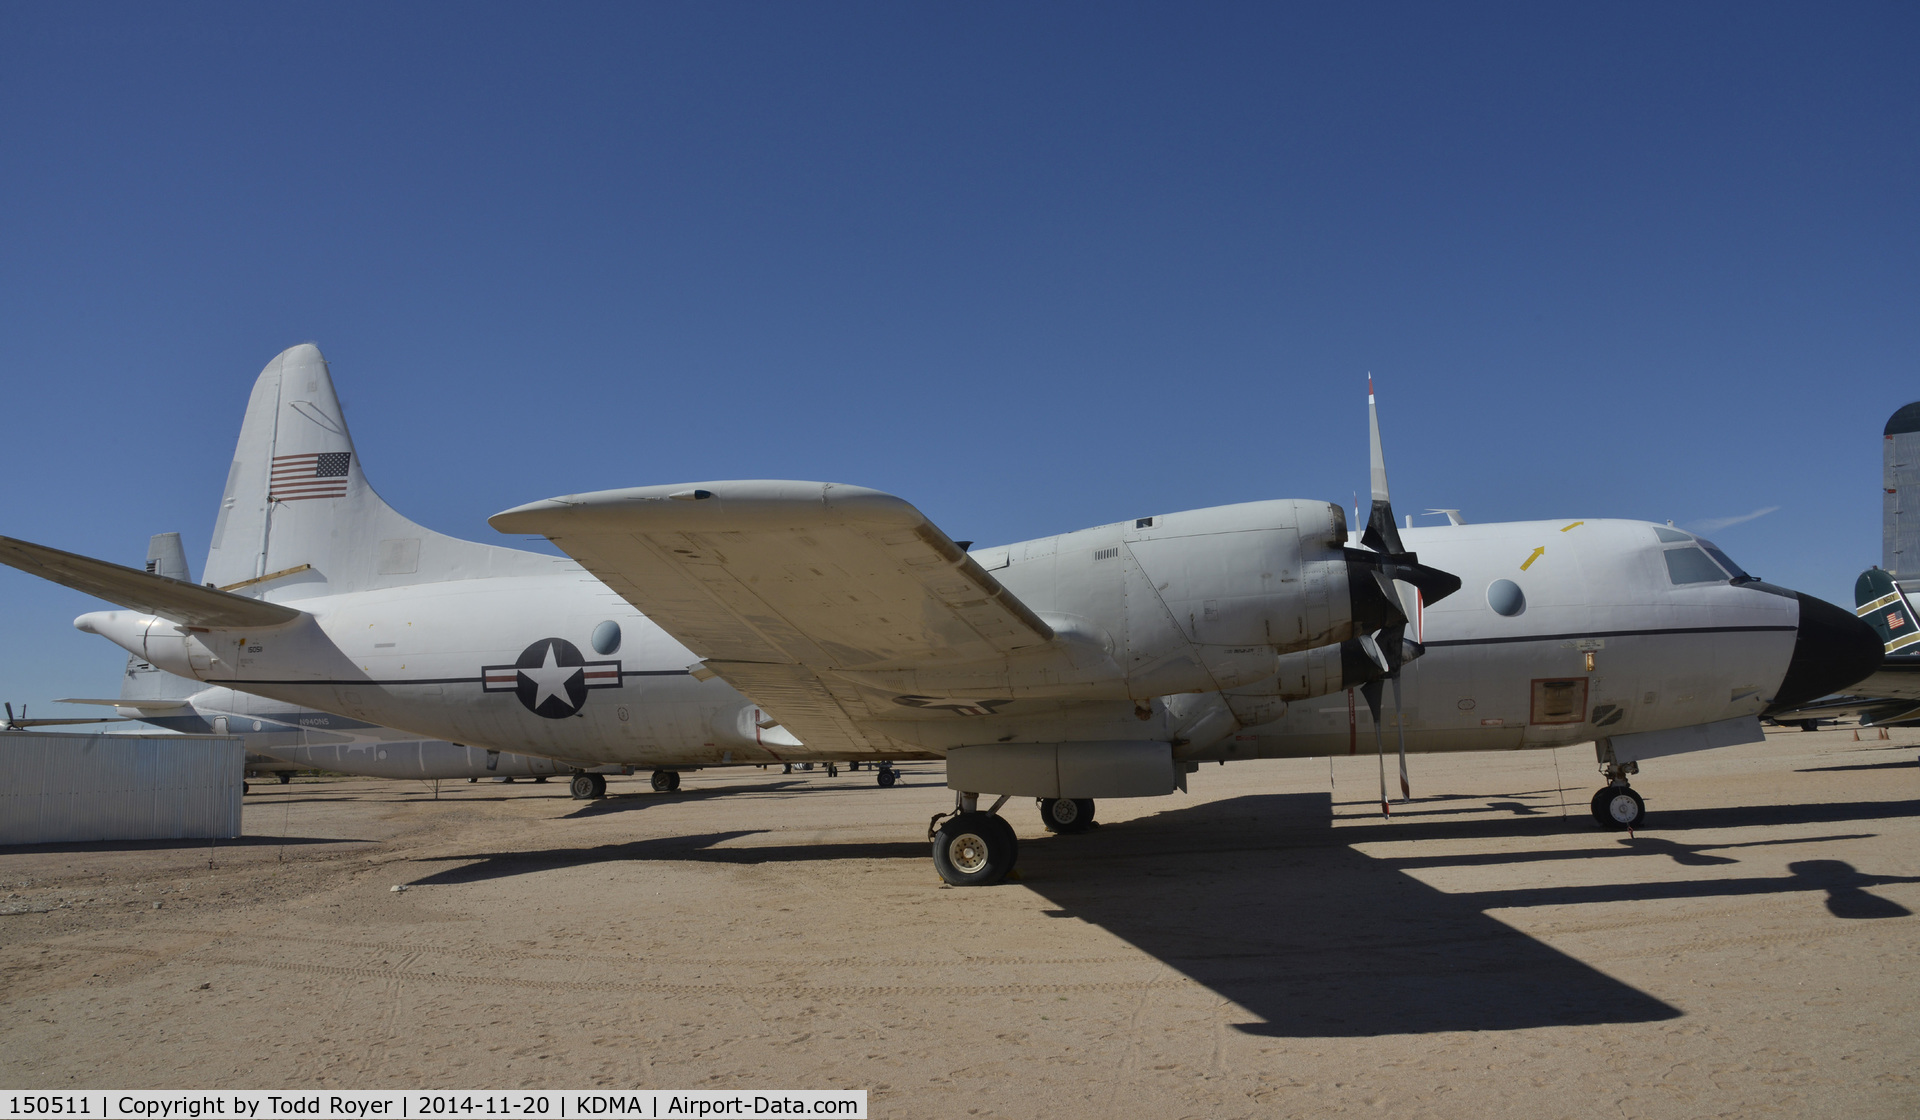 150511, Lockheed VP-3A Orion C/N 185-5037, On display at the Pima Air and Space Museum